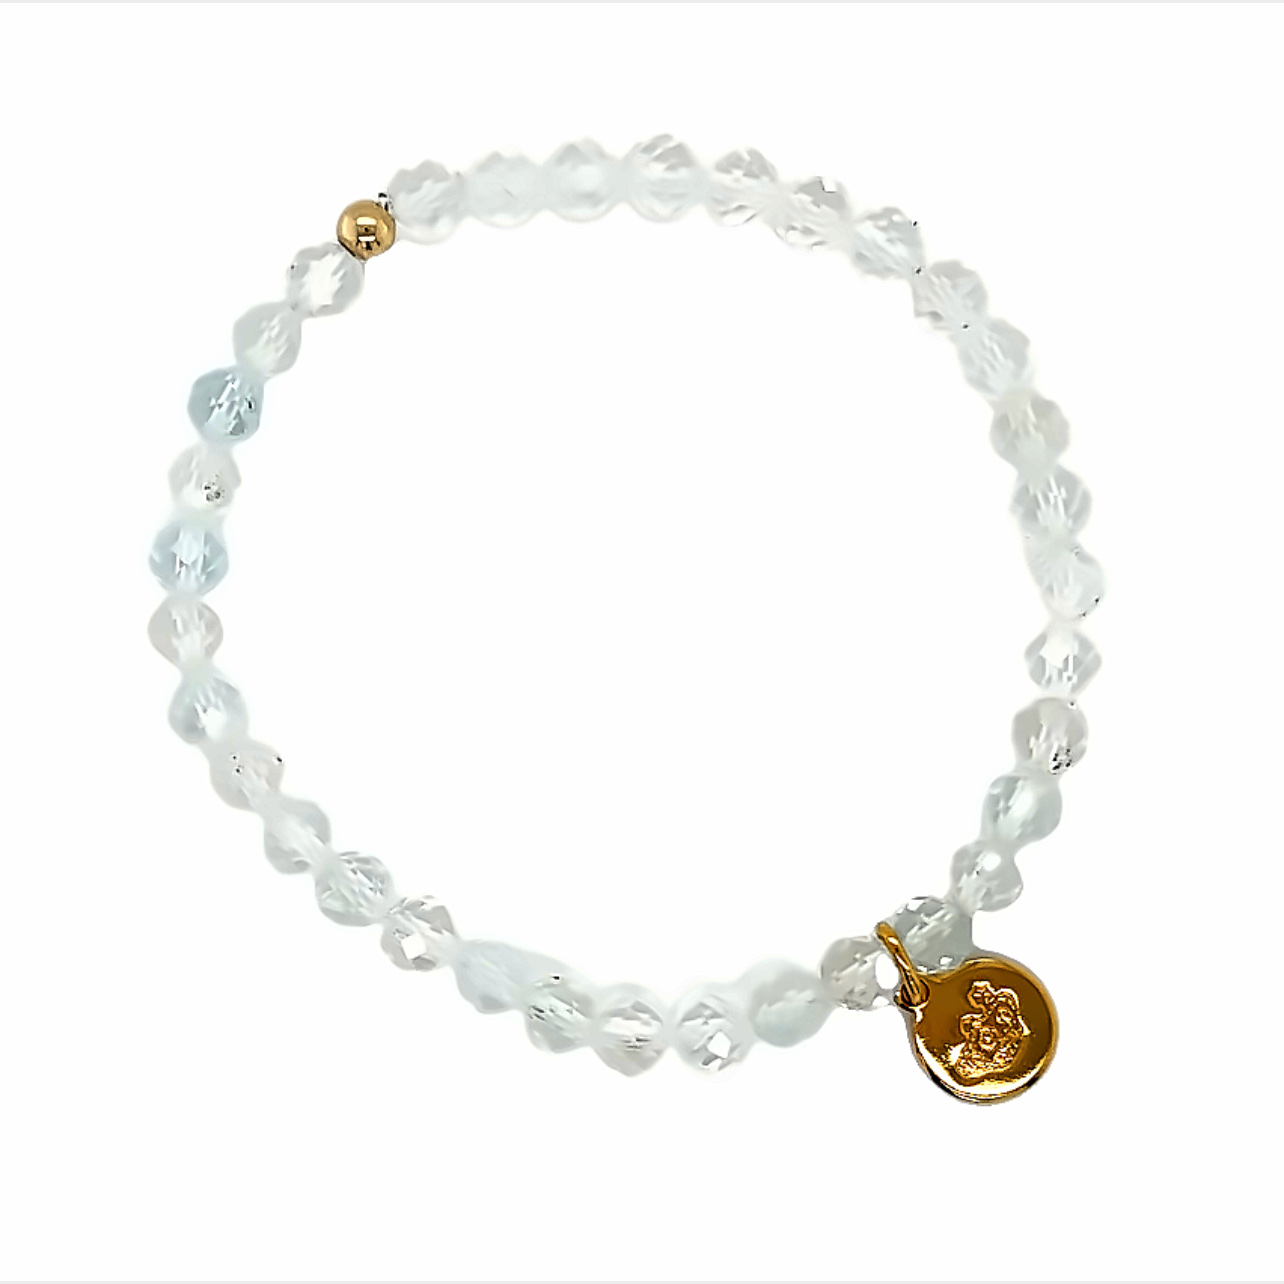 Bracelet With 34 Topaz Beads for the Hurwitz Breast Cancer Fund.   100% of proceeds will support the Hurwitz Breast Cancer Fund